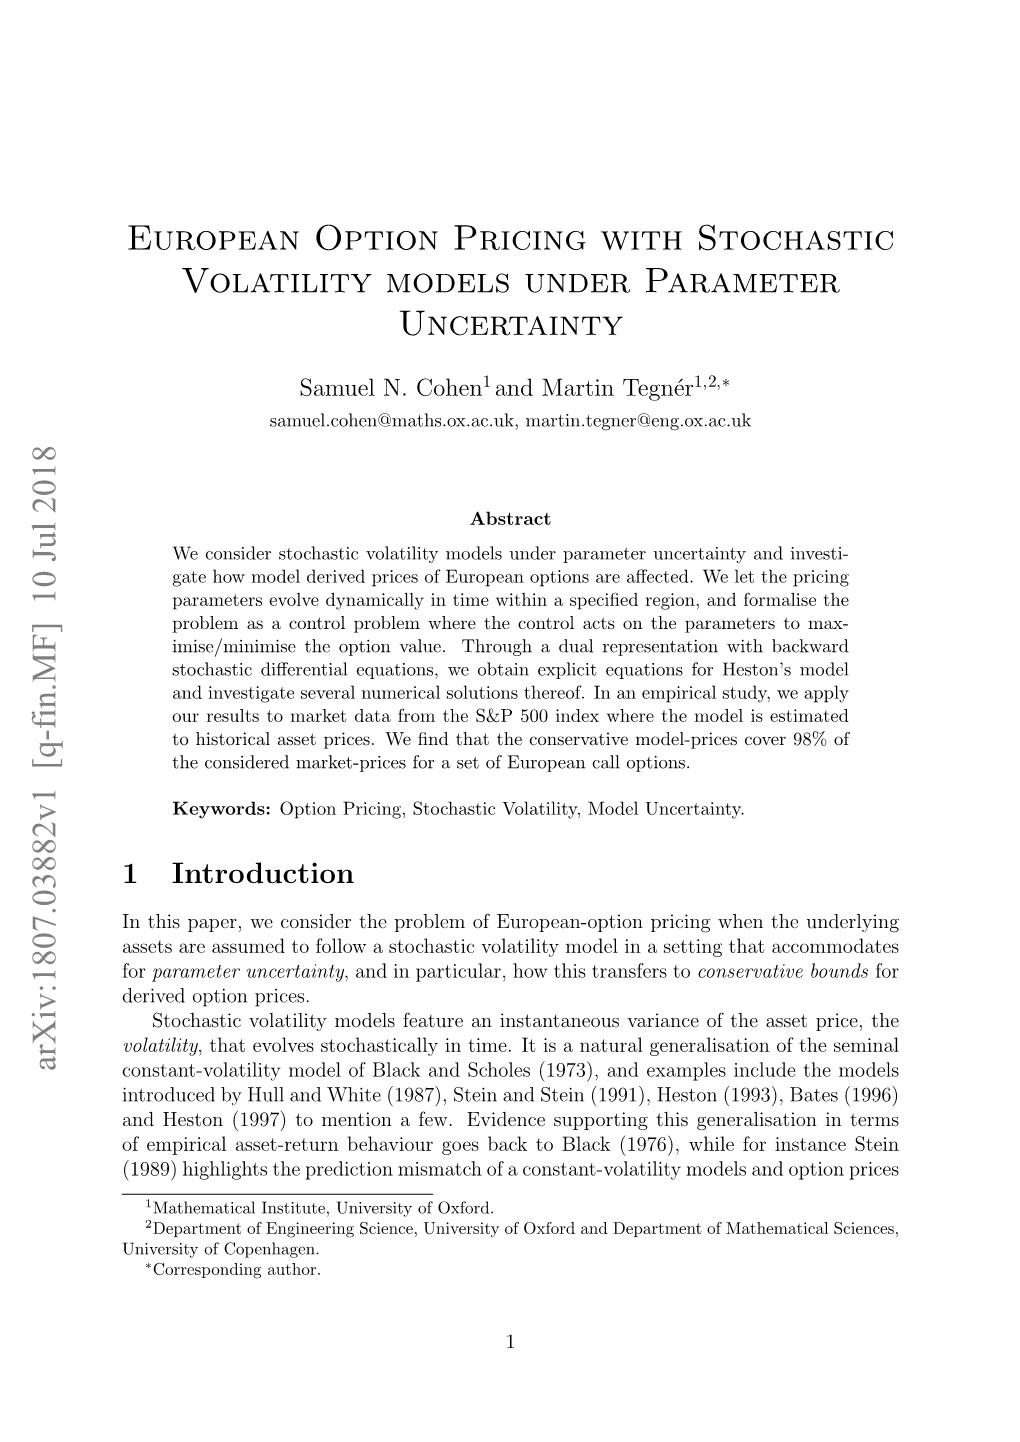 European Option Pricing with Stochastic Volatility Models Under Parameter Uncertainty